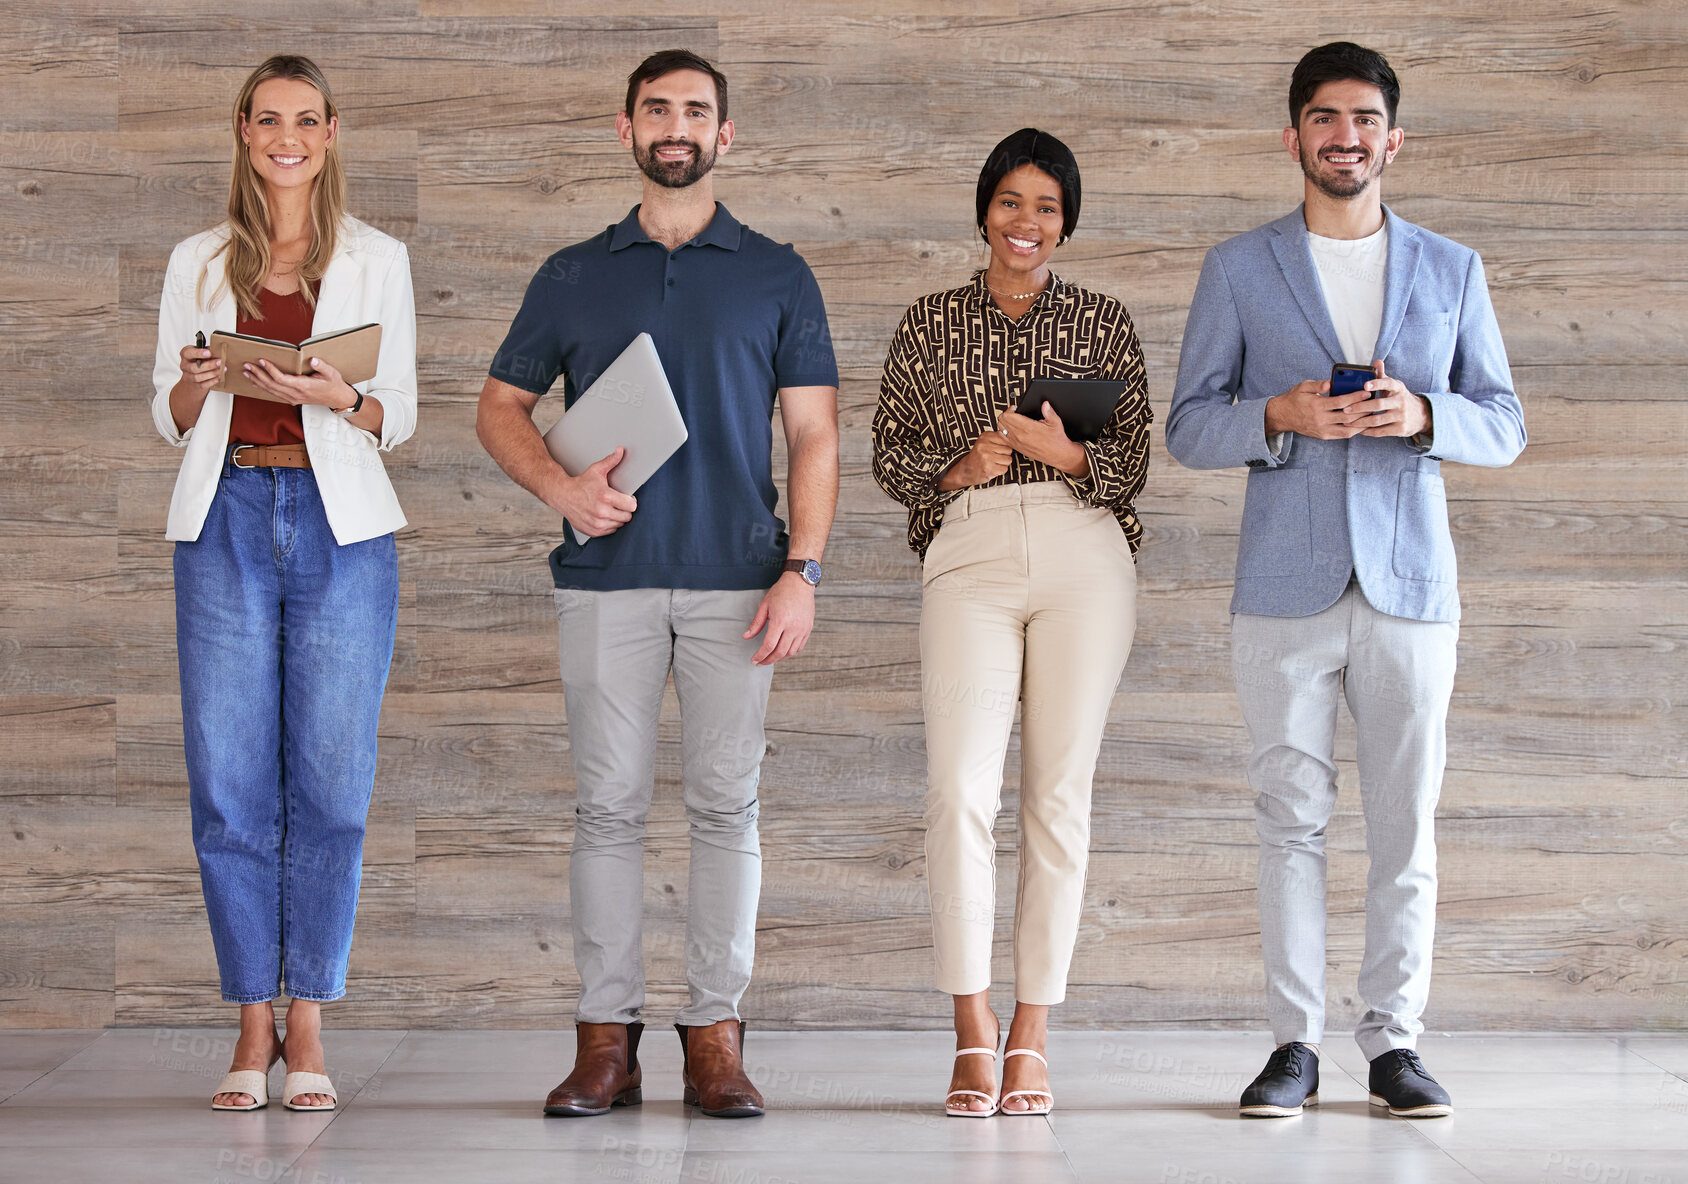 Buy stock photo Digital marketing team or business people happy for company growth and standing in an office building. Portrait of advertising employees or colleagues smiling working on startup social media strategy